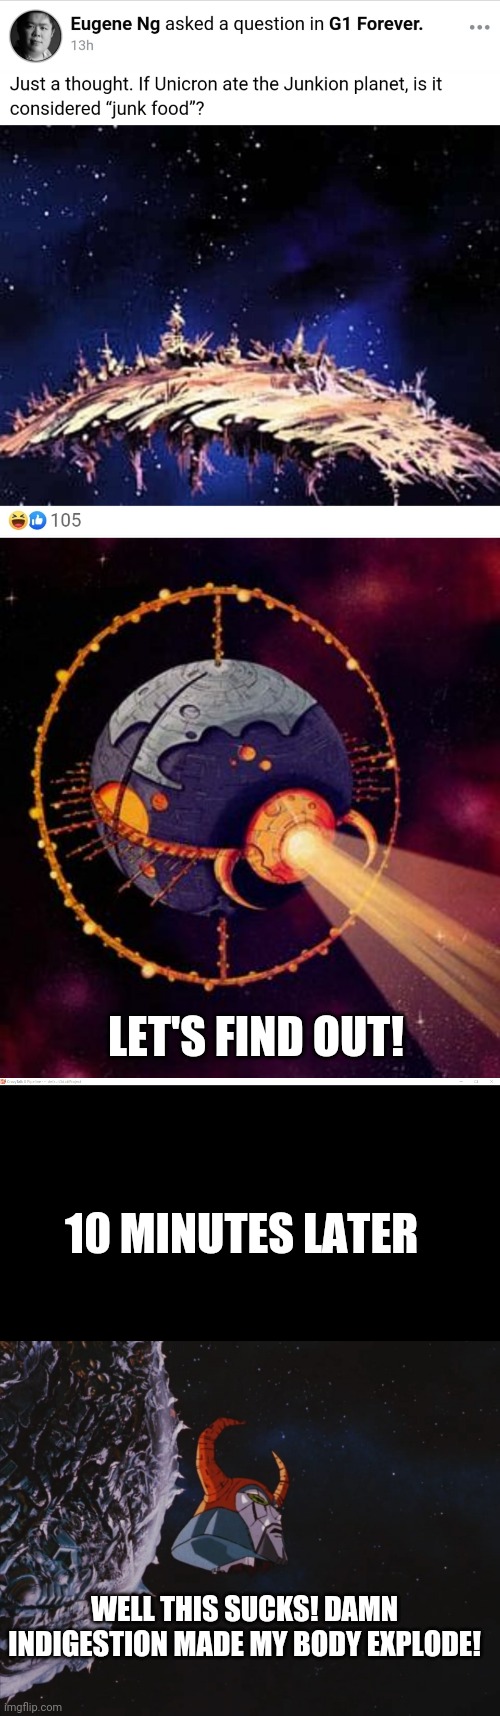 LET'S FIND OUT! 10 MINUTES LATER; WELL THIS SUCKS! DAMN INDIGESTION MADE MY BODY EXPLODE! | image tagged in unicron | made w/ Imgflip meme maker